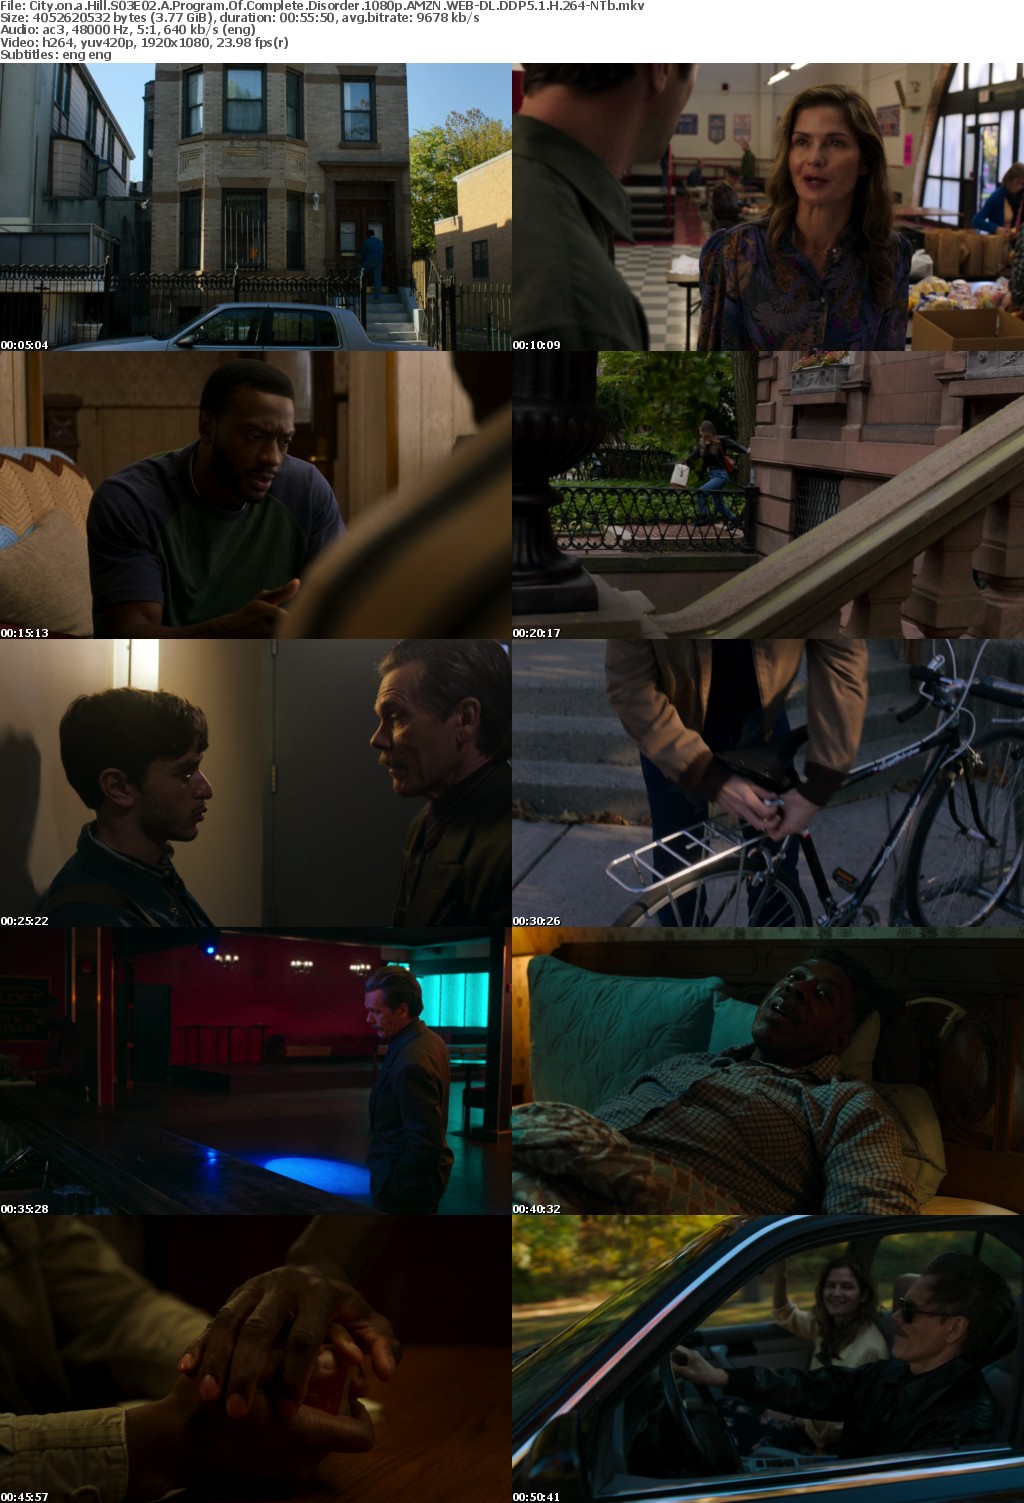 City on a Hill S03E02 A Program Of Complete Disorder 1080p AMZN WEB-DL DDP5 1 H 264-NTb